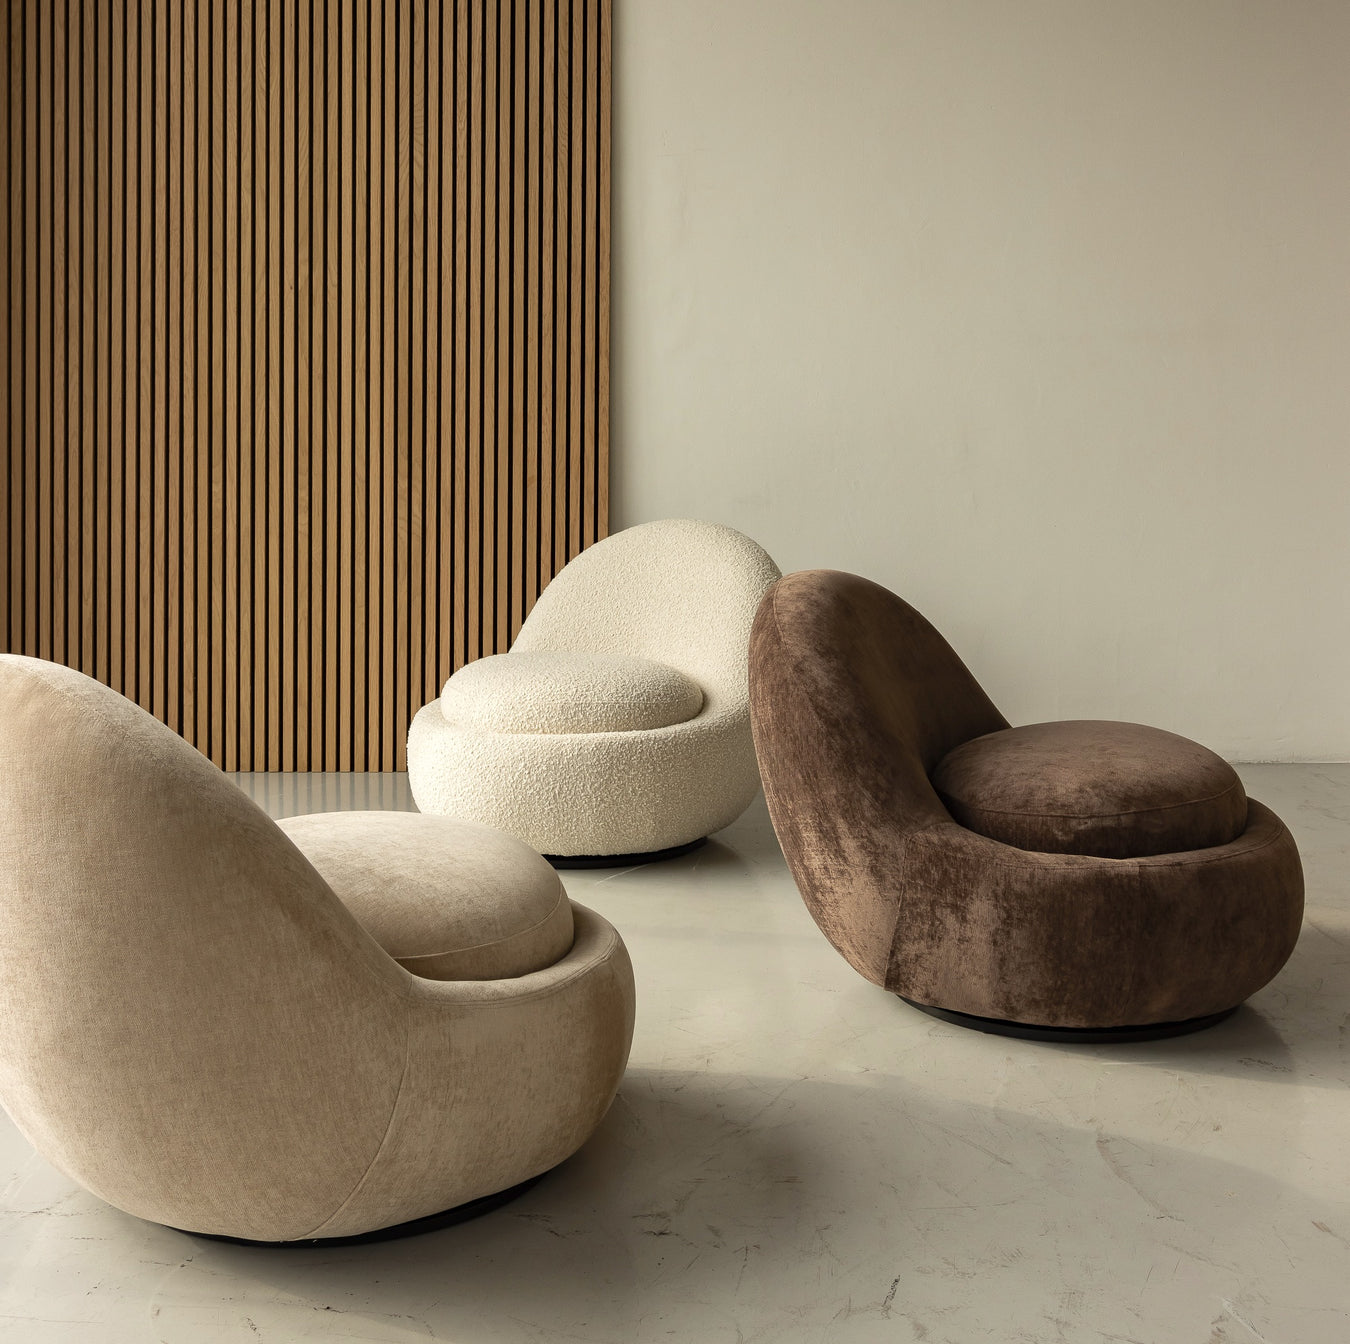 Babette Swivel chairs - the ultimate in Danish Designed elegance and luxury in a fashionable and trendy swivel chair for your living room